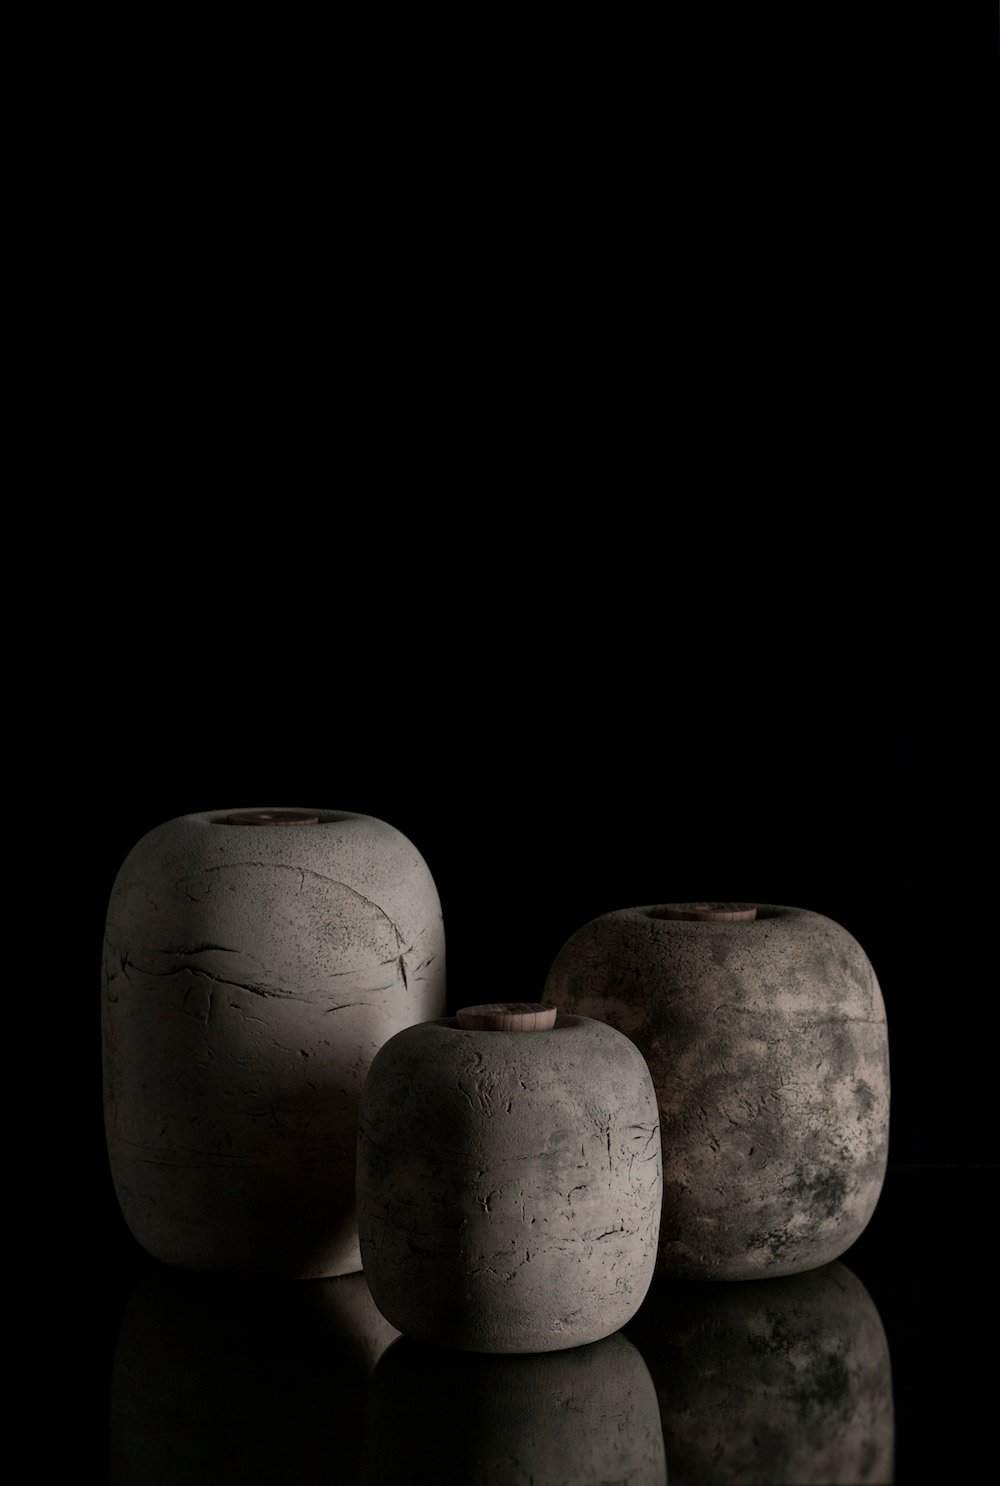 Urns collection, winner of the Product and Industrial Design category